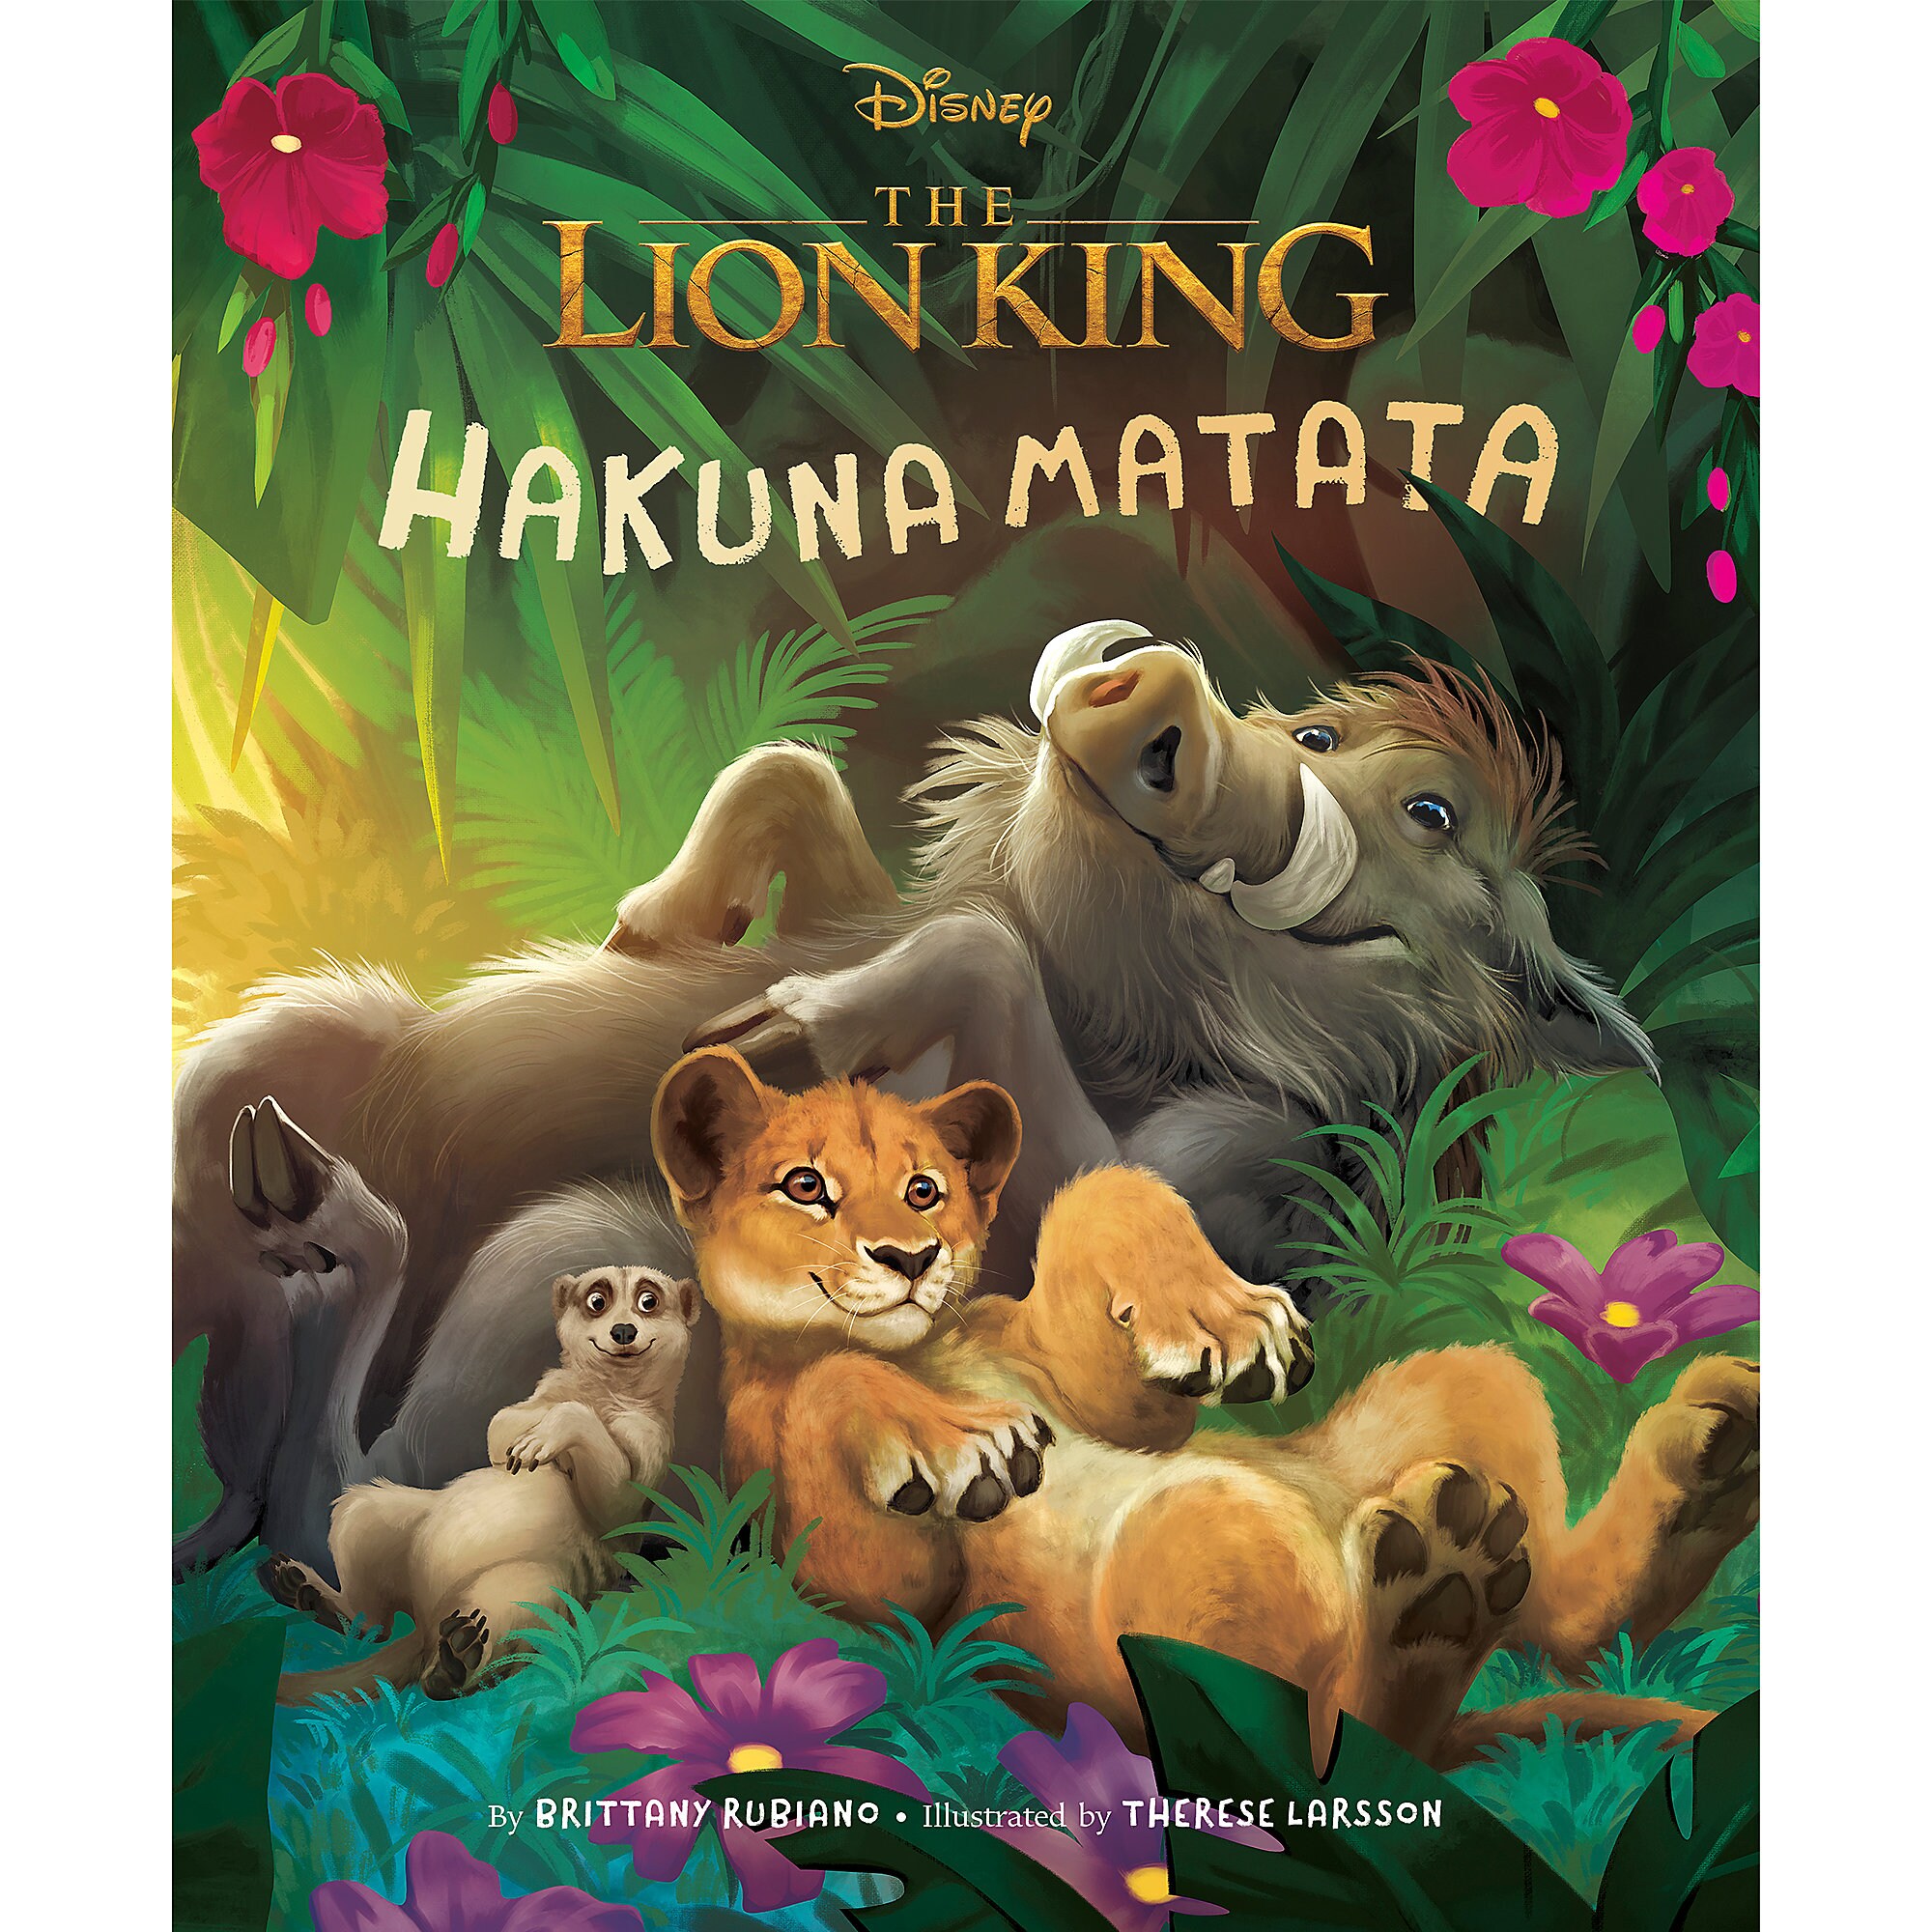 The Lion King Picture Book: Hakuna Matata Book - The Lion King 2019 Film